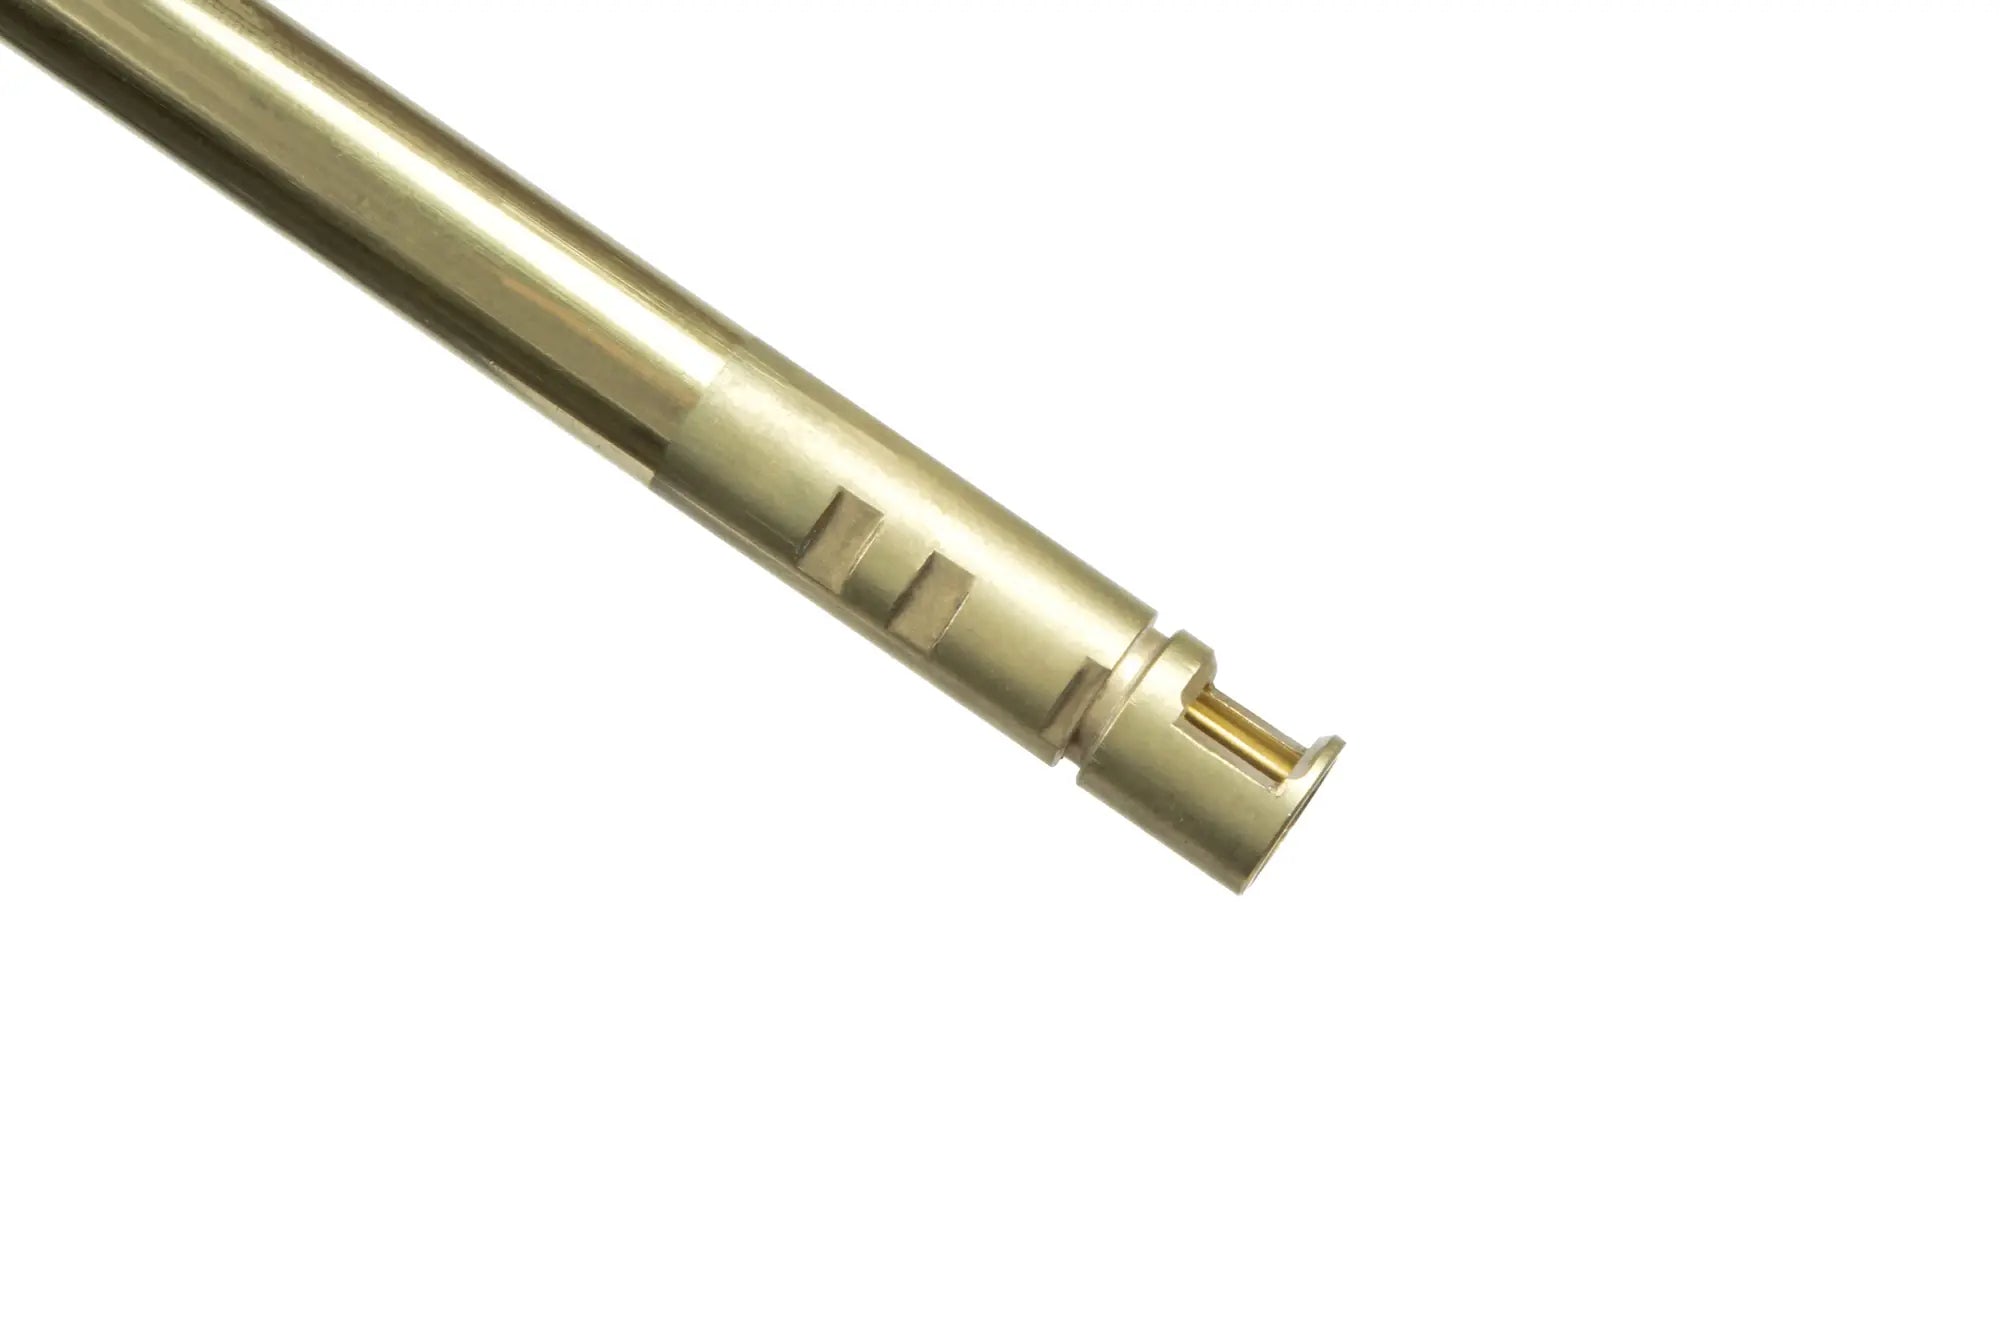 Grizzly Precision Barrel 6.03mm